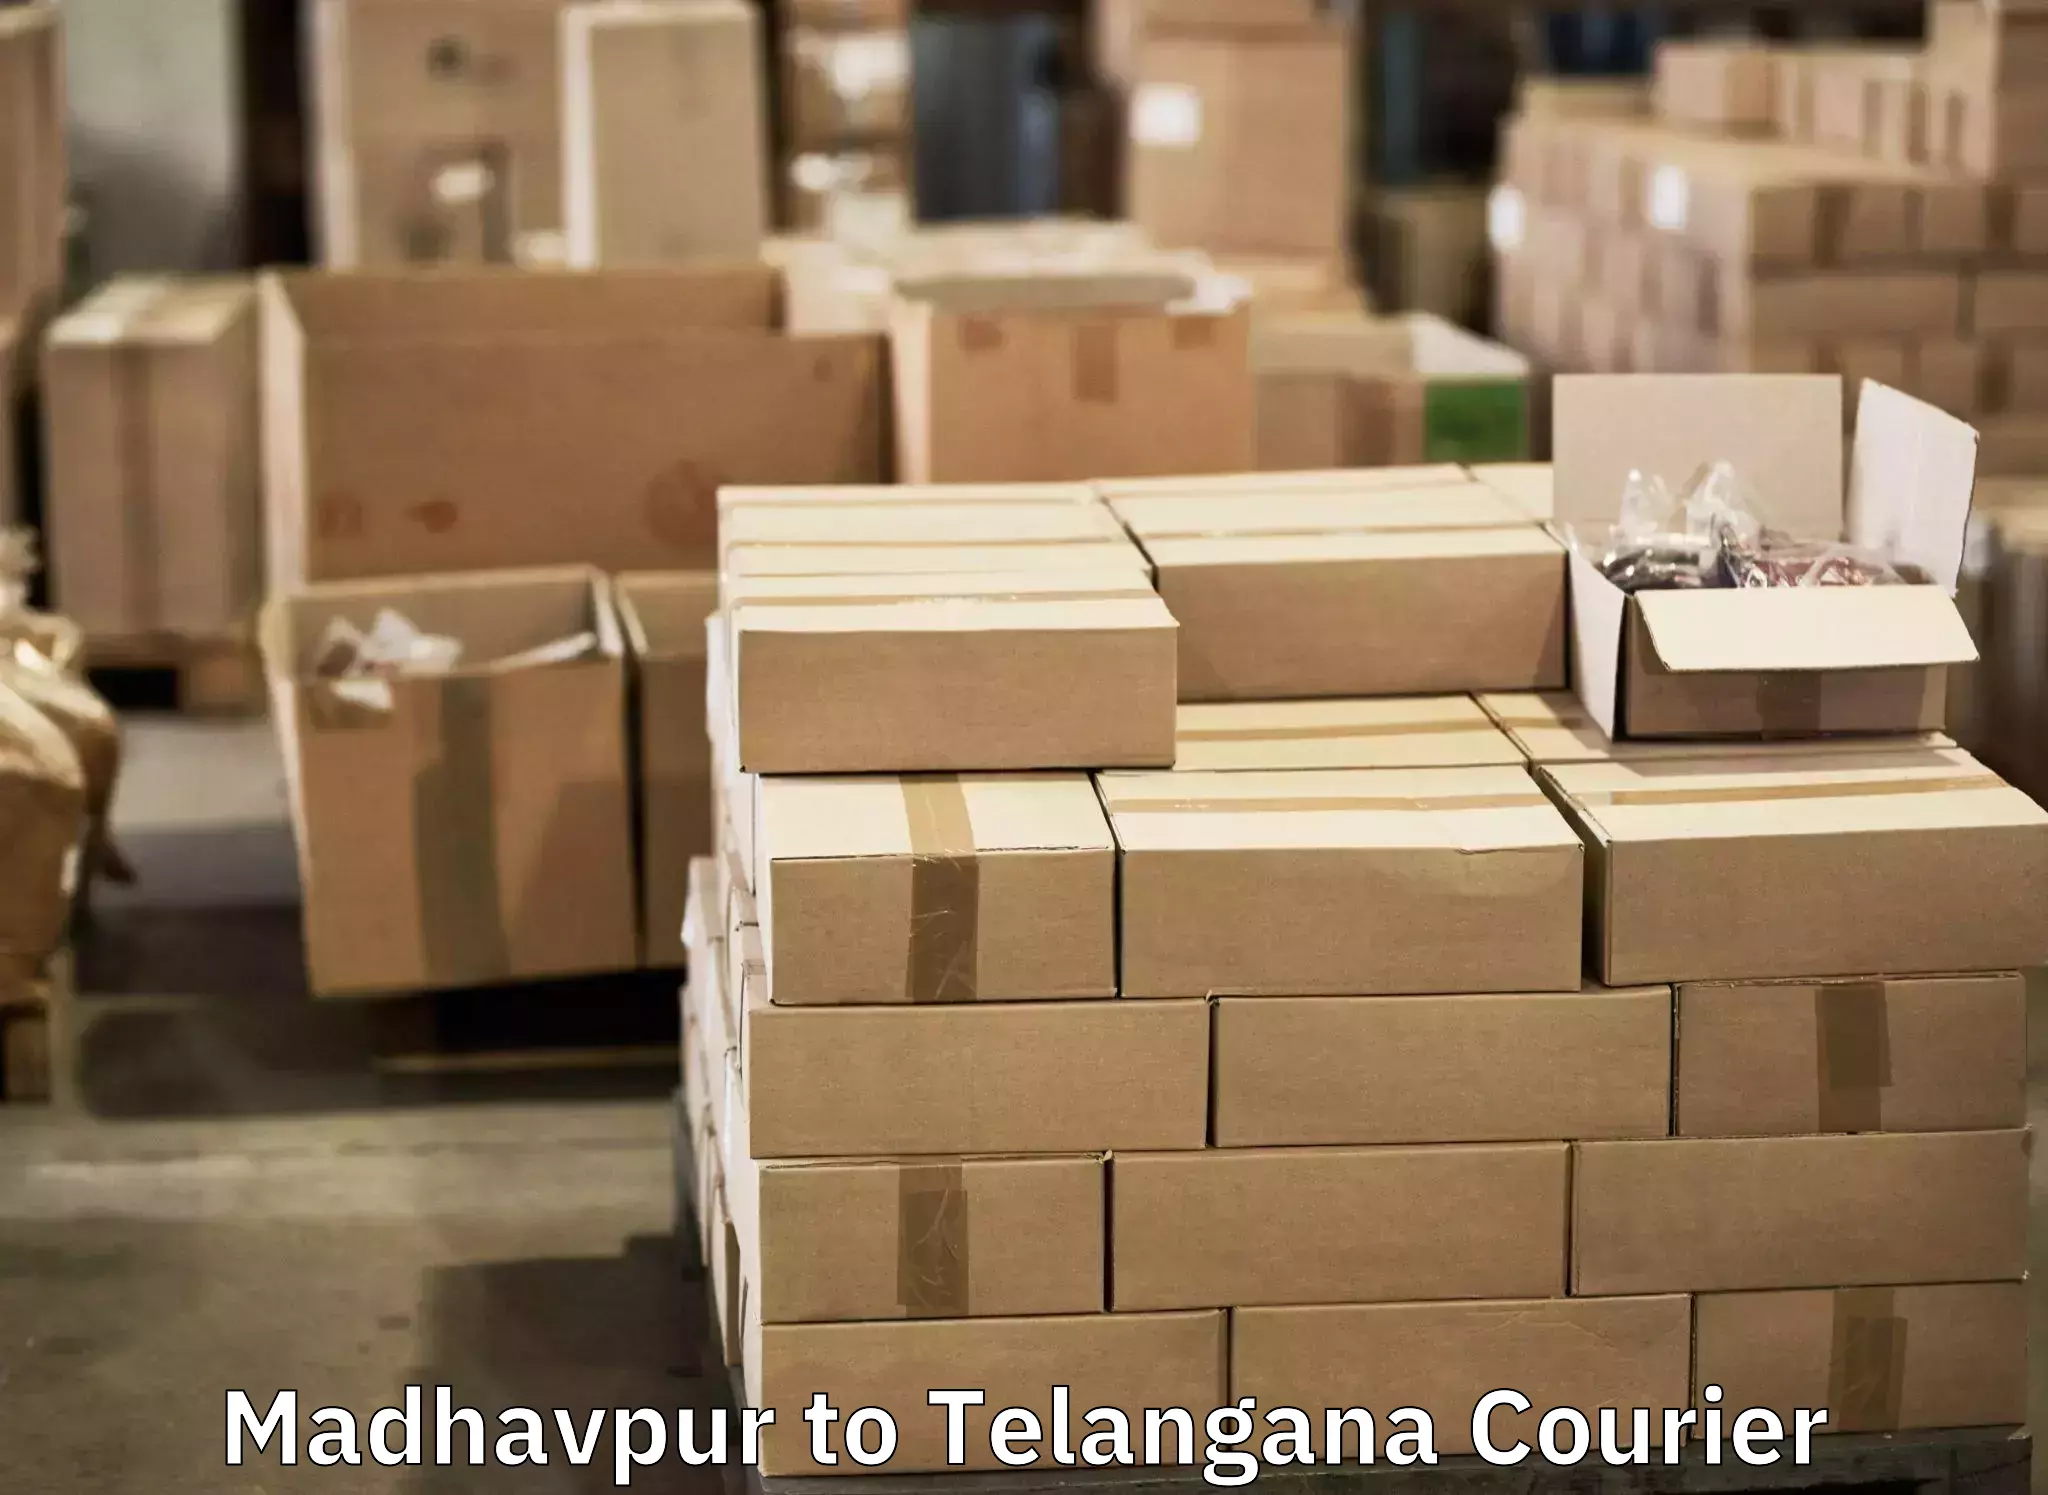 Luggage transport company Madhavpur to Trimulgherry